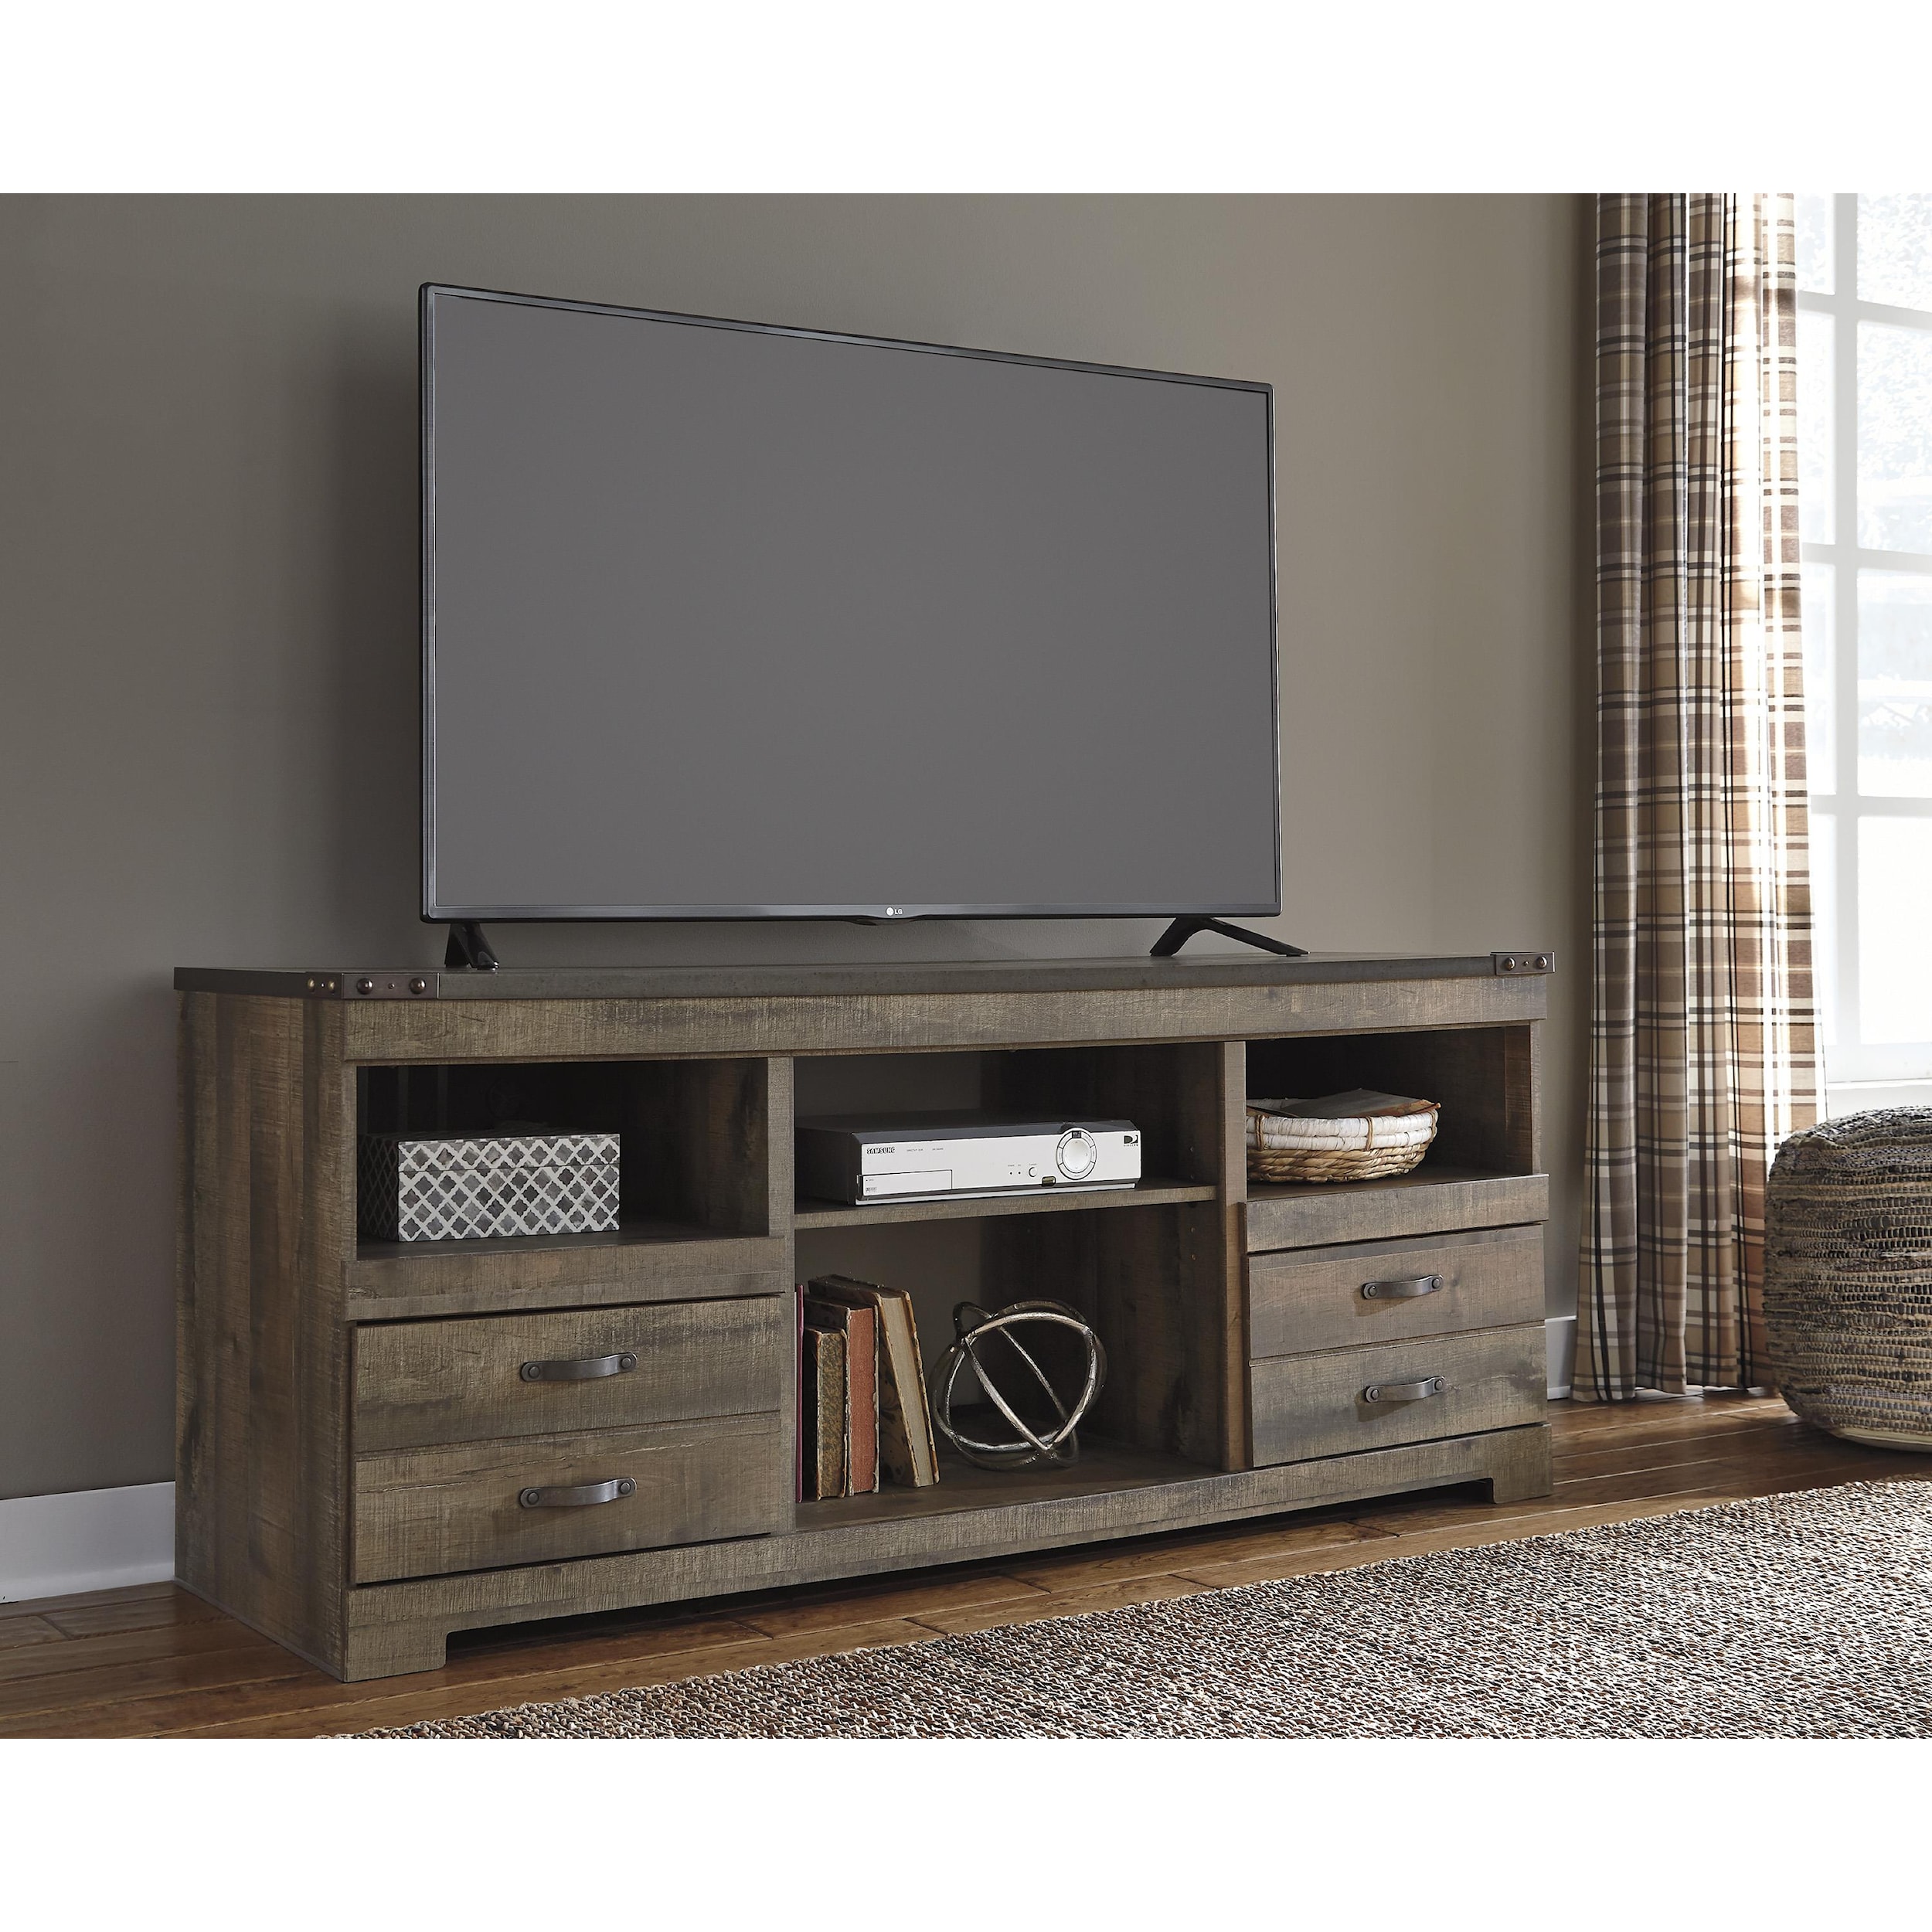 Ashley Signature Design Trinell W446 68 Rustic Large Tv Stand With